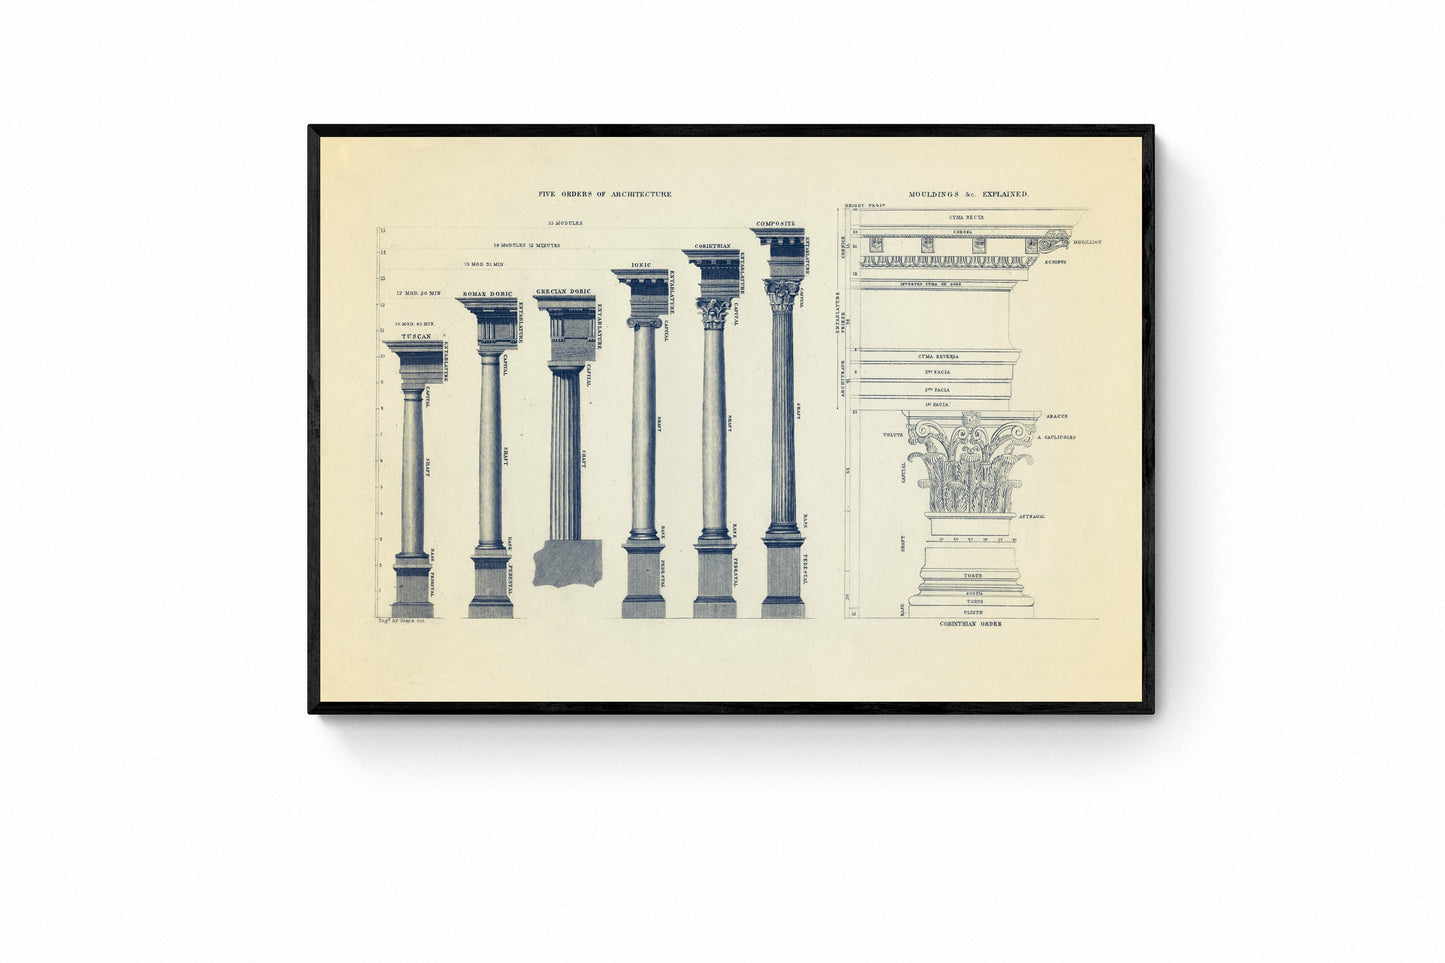 Orders of Architecture and Architectural Mouldings Print